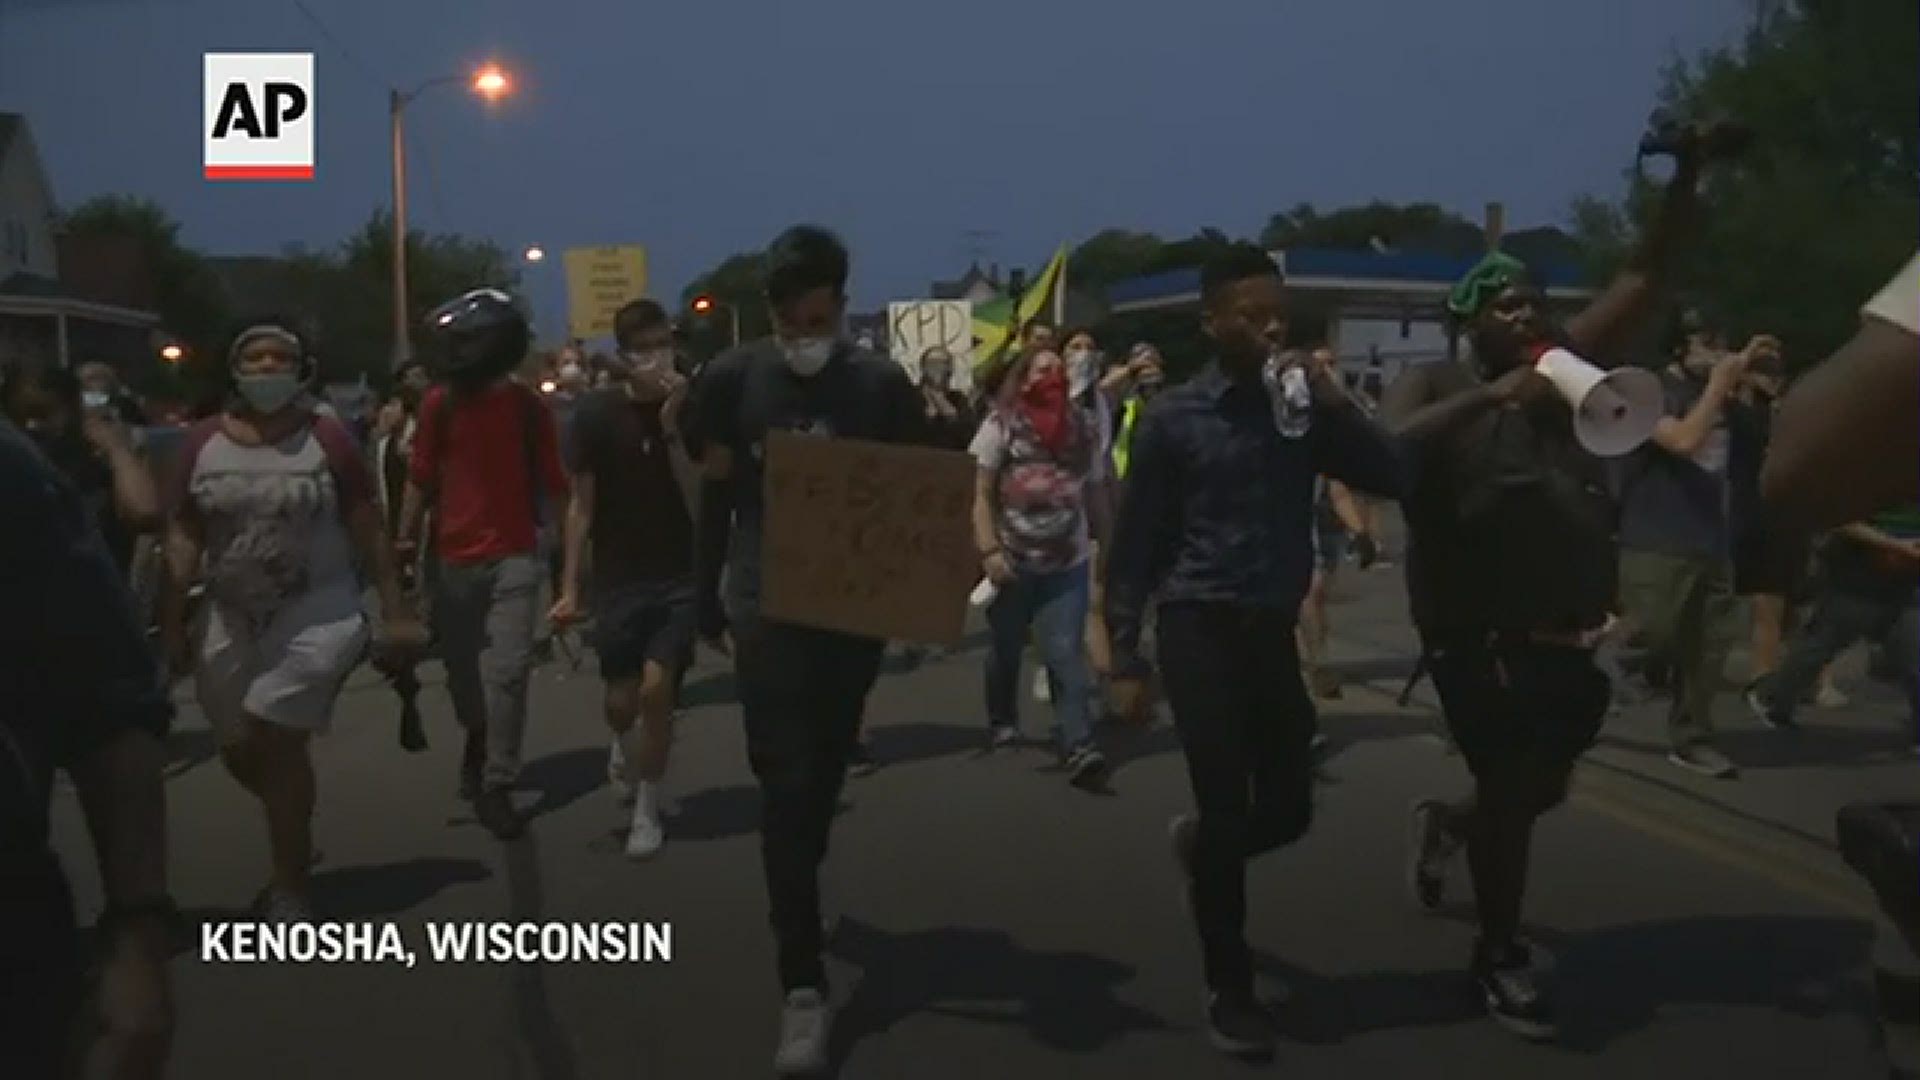 Protesters marched through the streets of Kenosha, Wisconsin Aug. 26 as tensions remained high over the police shooting of a Black man, Jacob Blake.